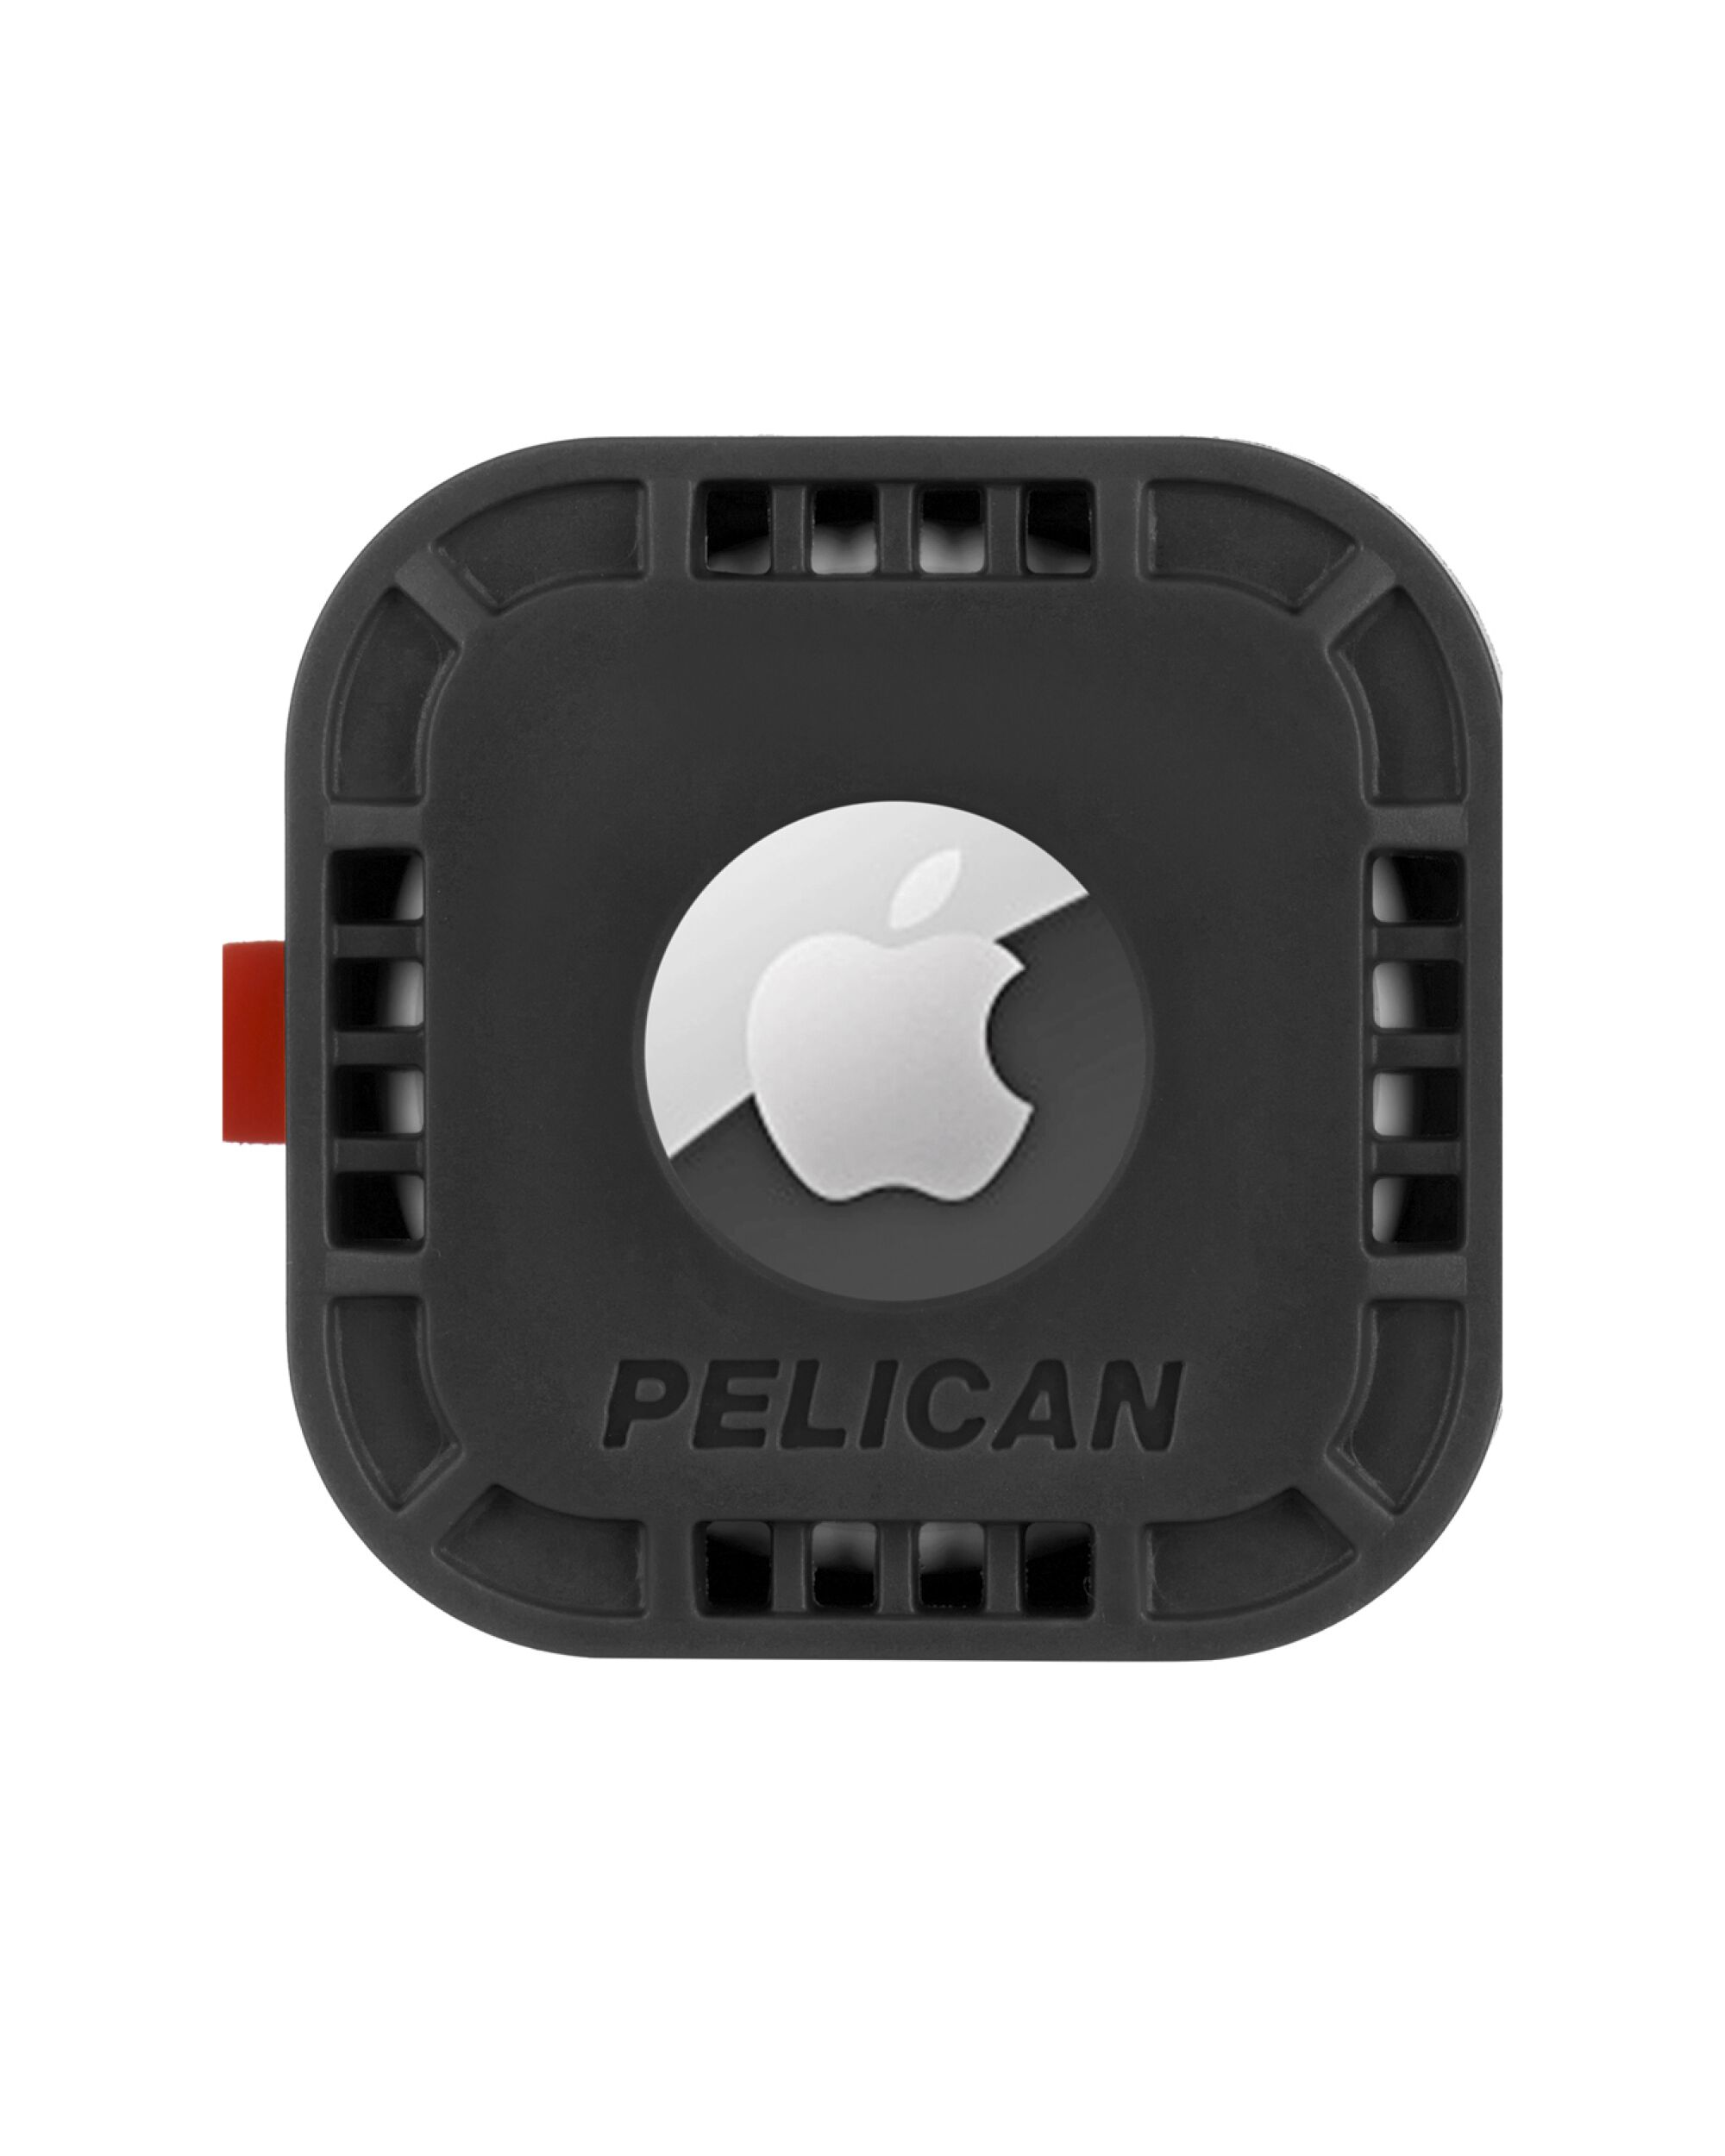 An air tag case from Pelican